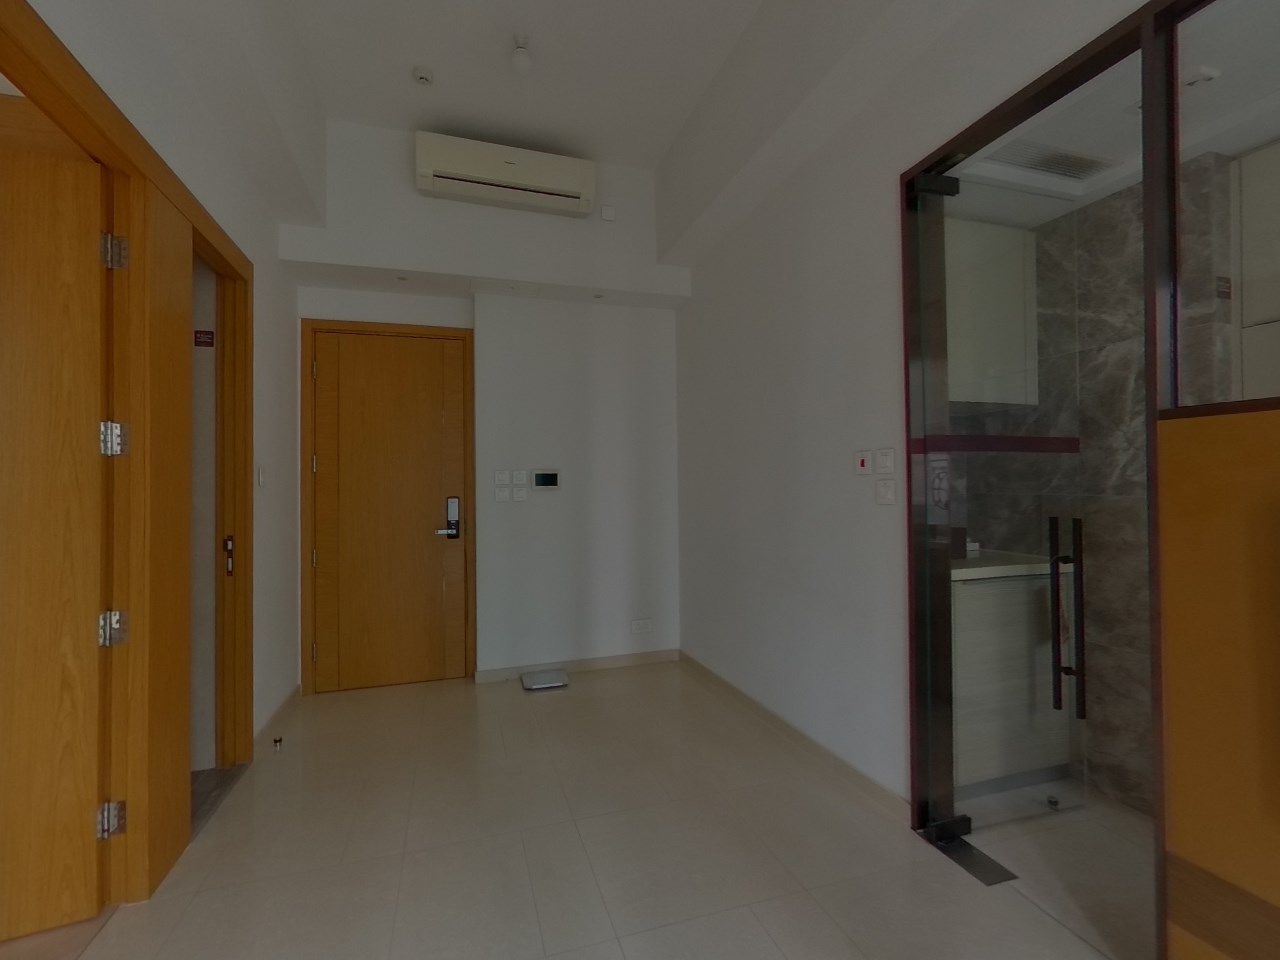 IMPERIAL KENNEDY Medium Floor Zone Flat D Central/Sheung Wan/Western District